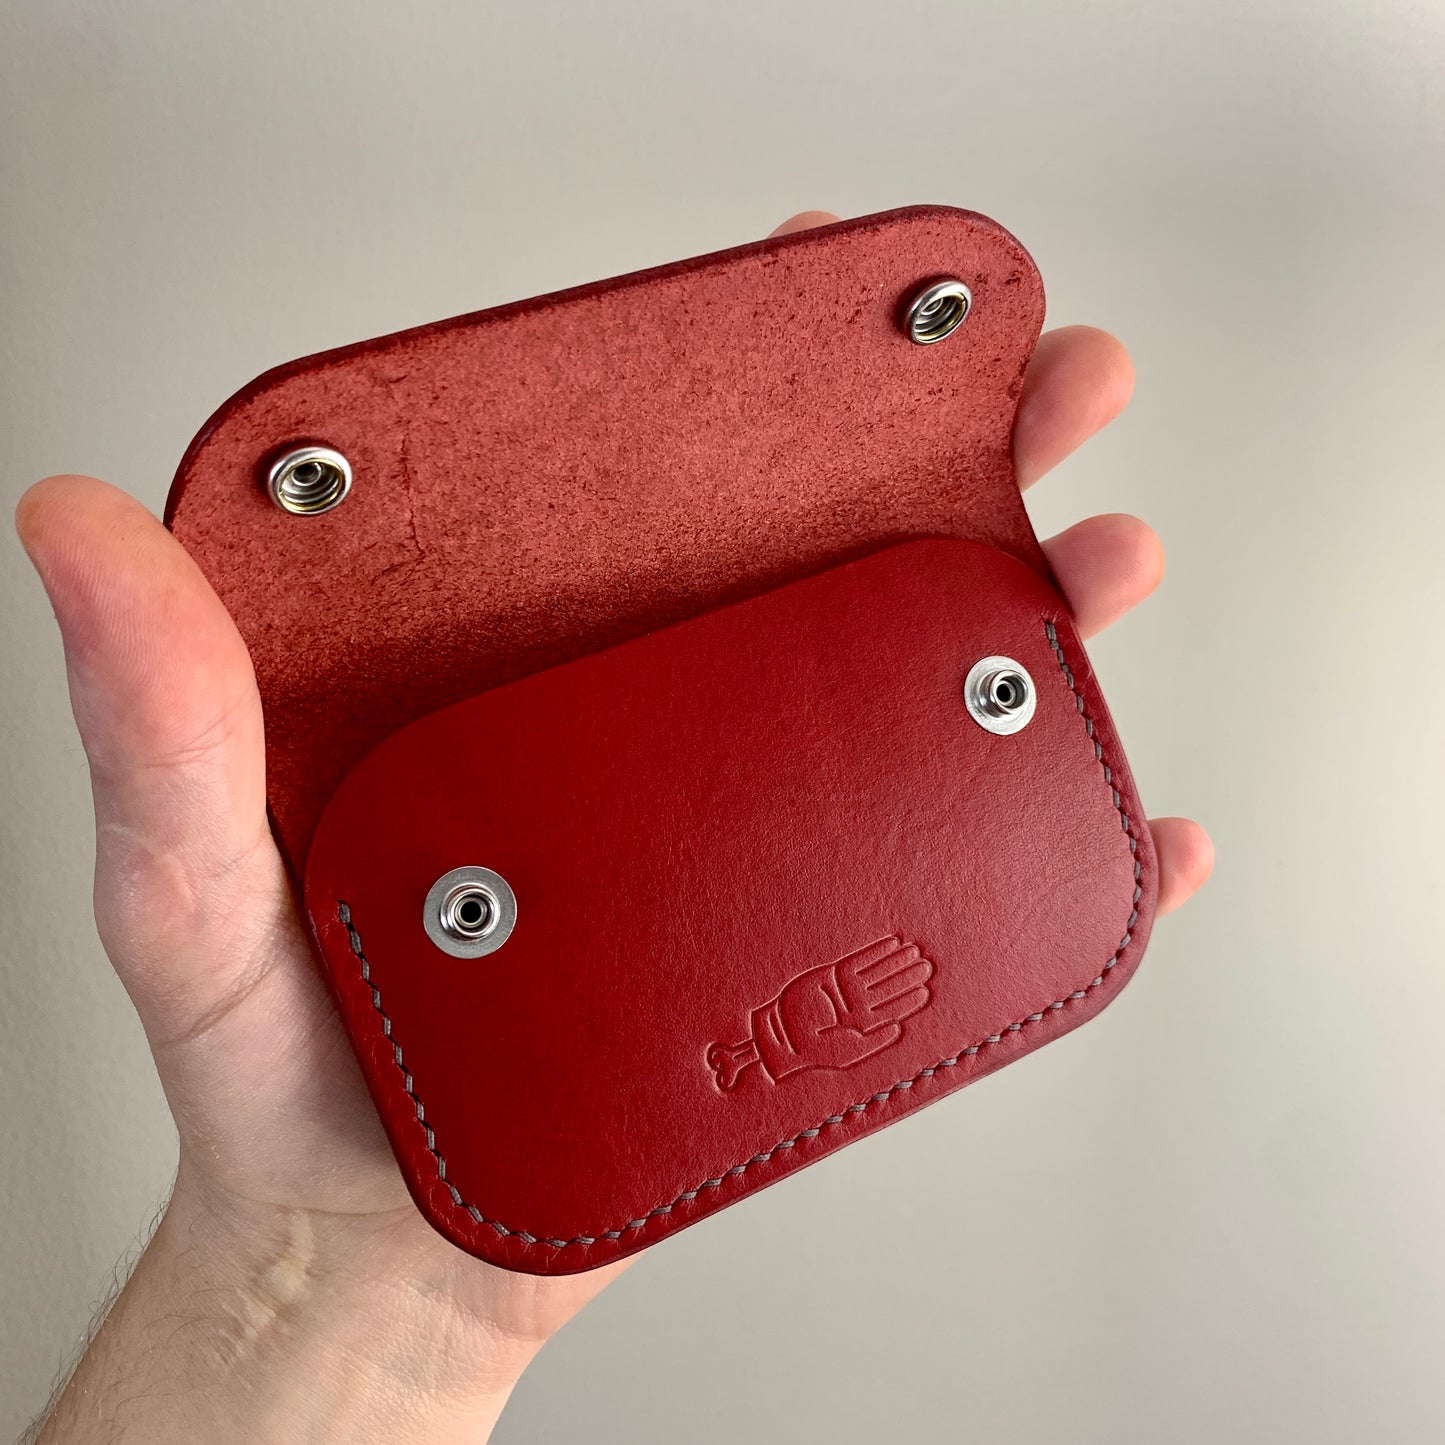 The Crush Snap Wallet - Red/Marbled/Grey